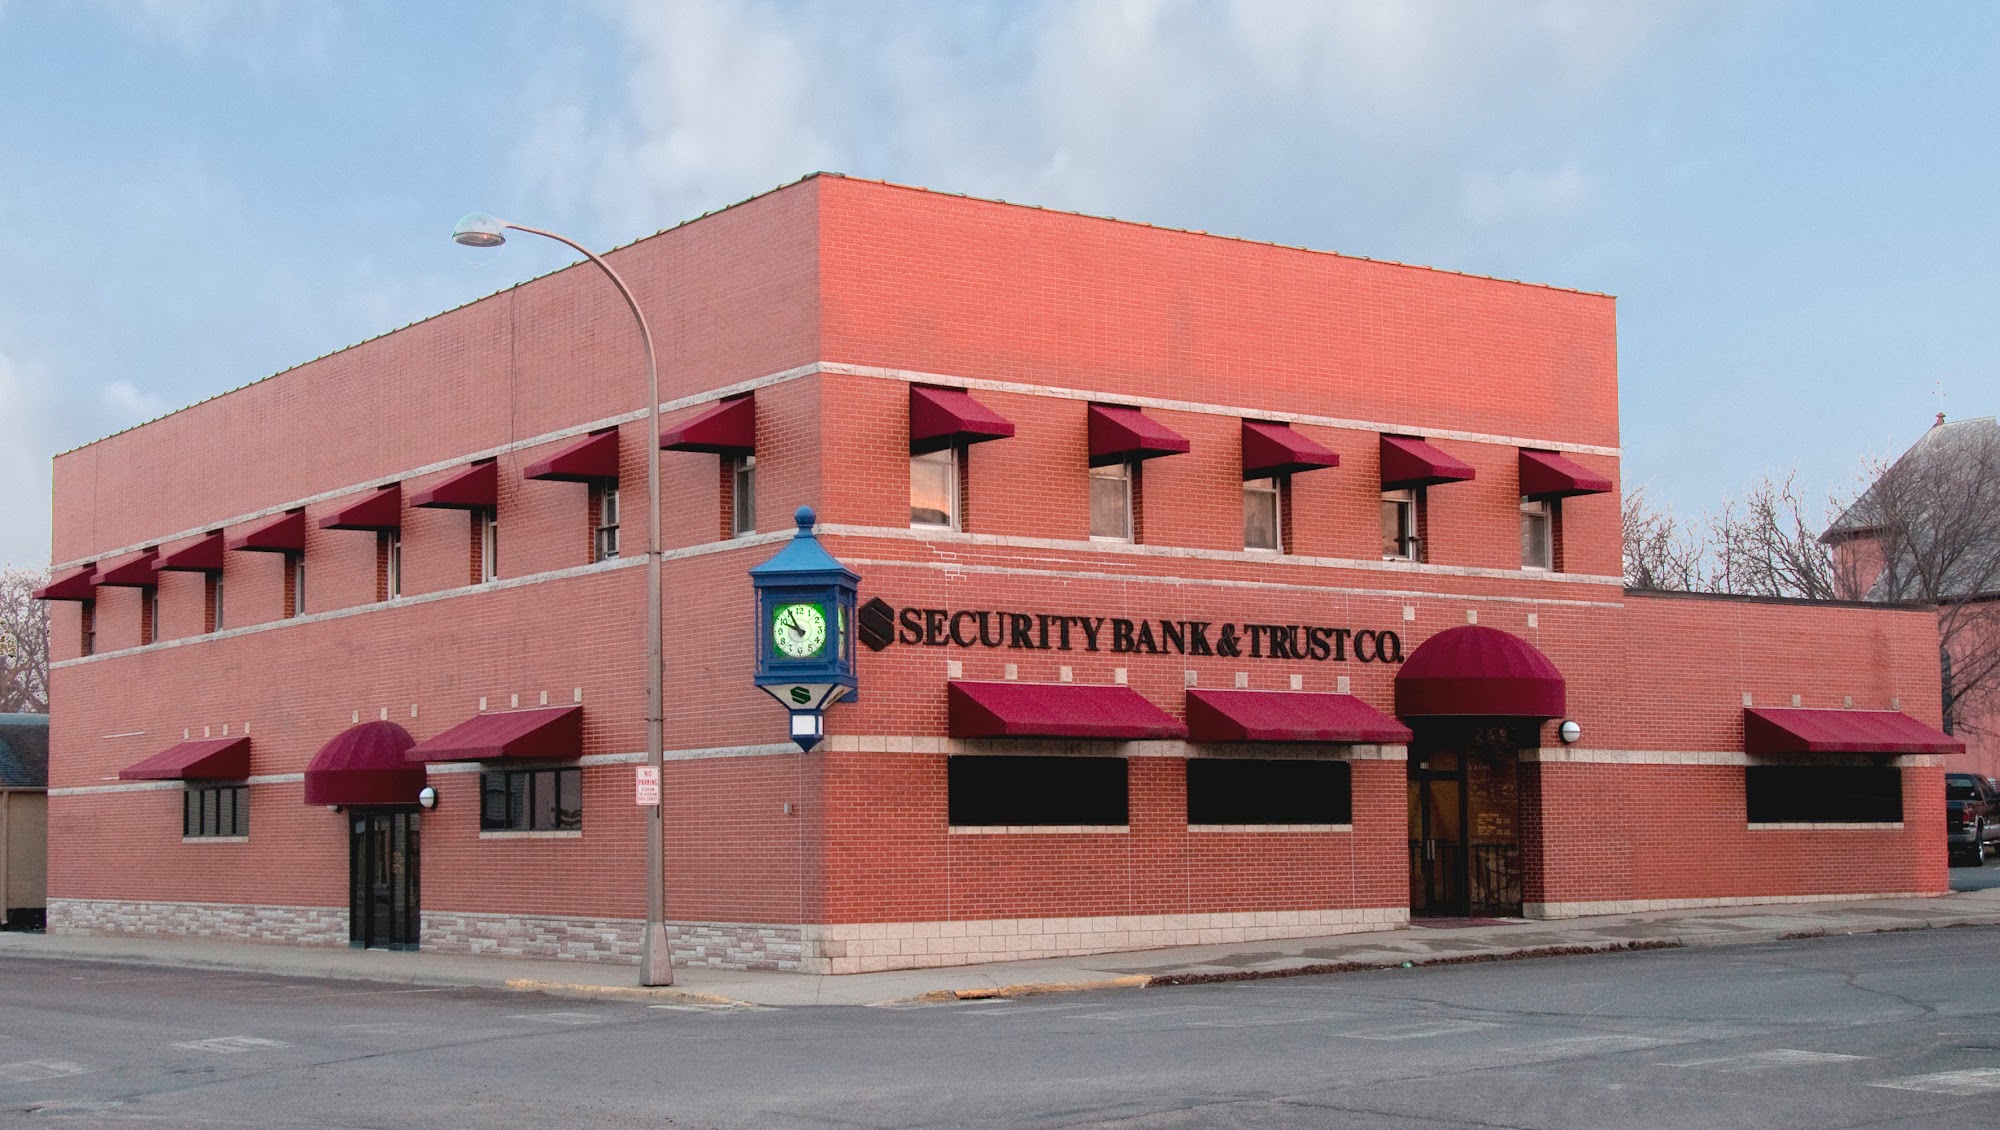 Security Bank & Trust Co.